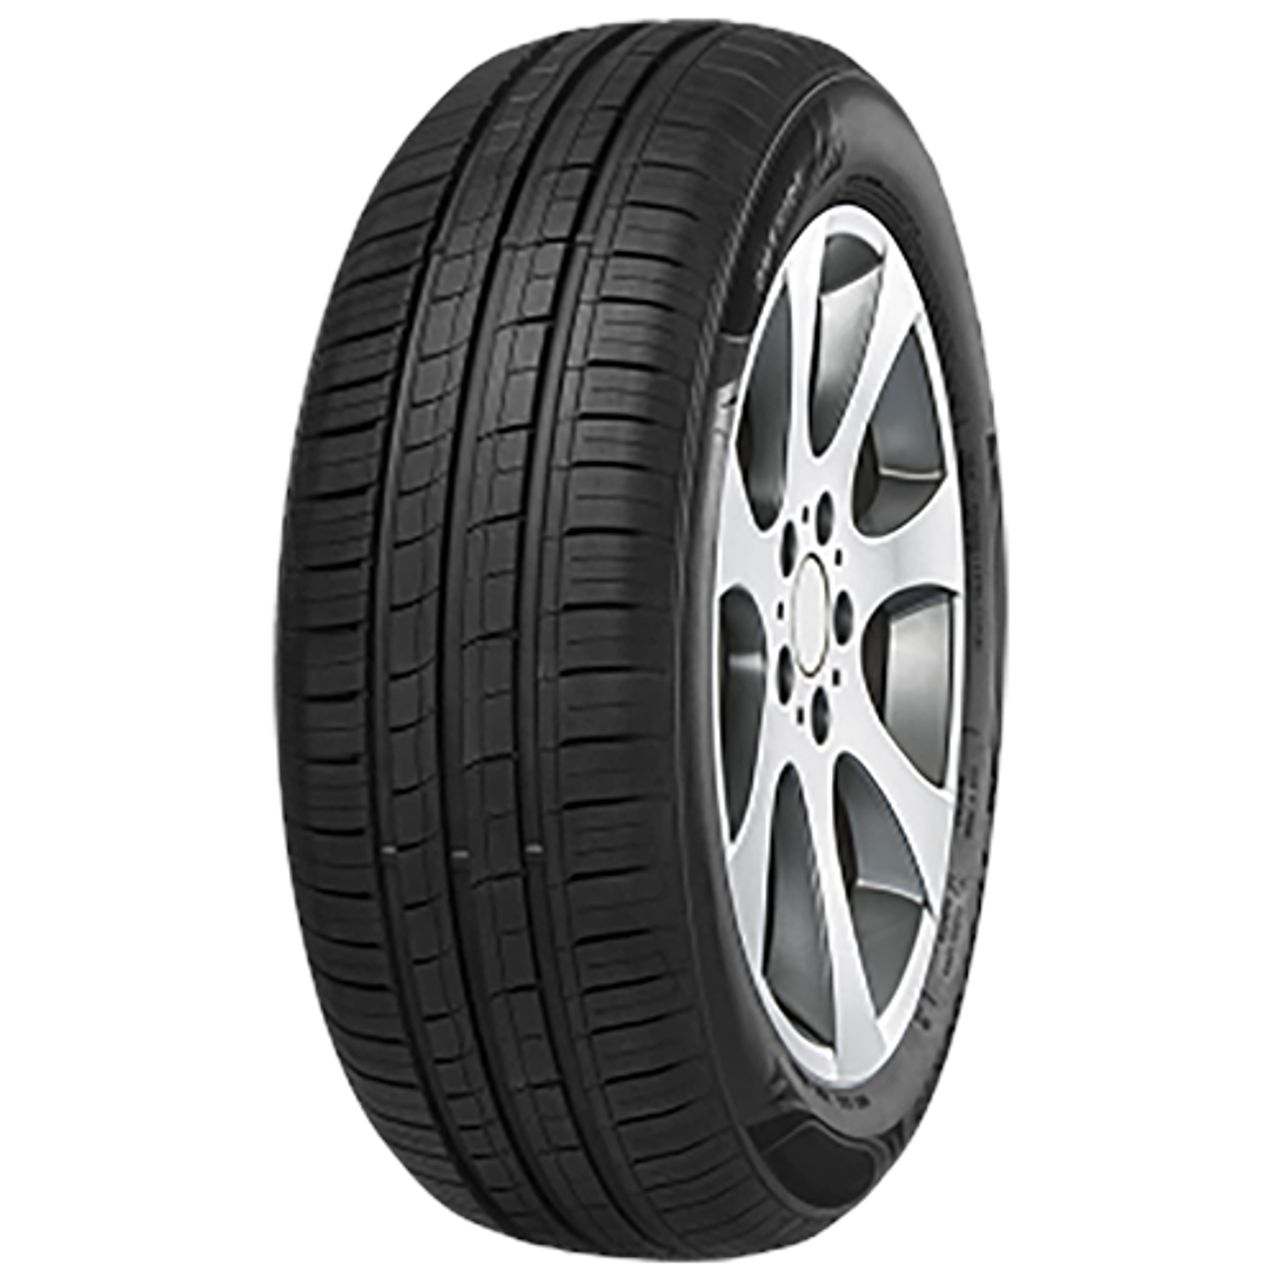 IMPERIAL ECODRIVER 4 175/65R14 82T 